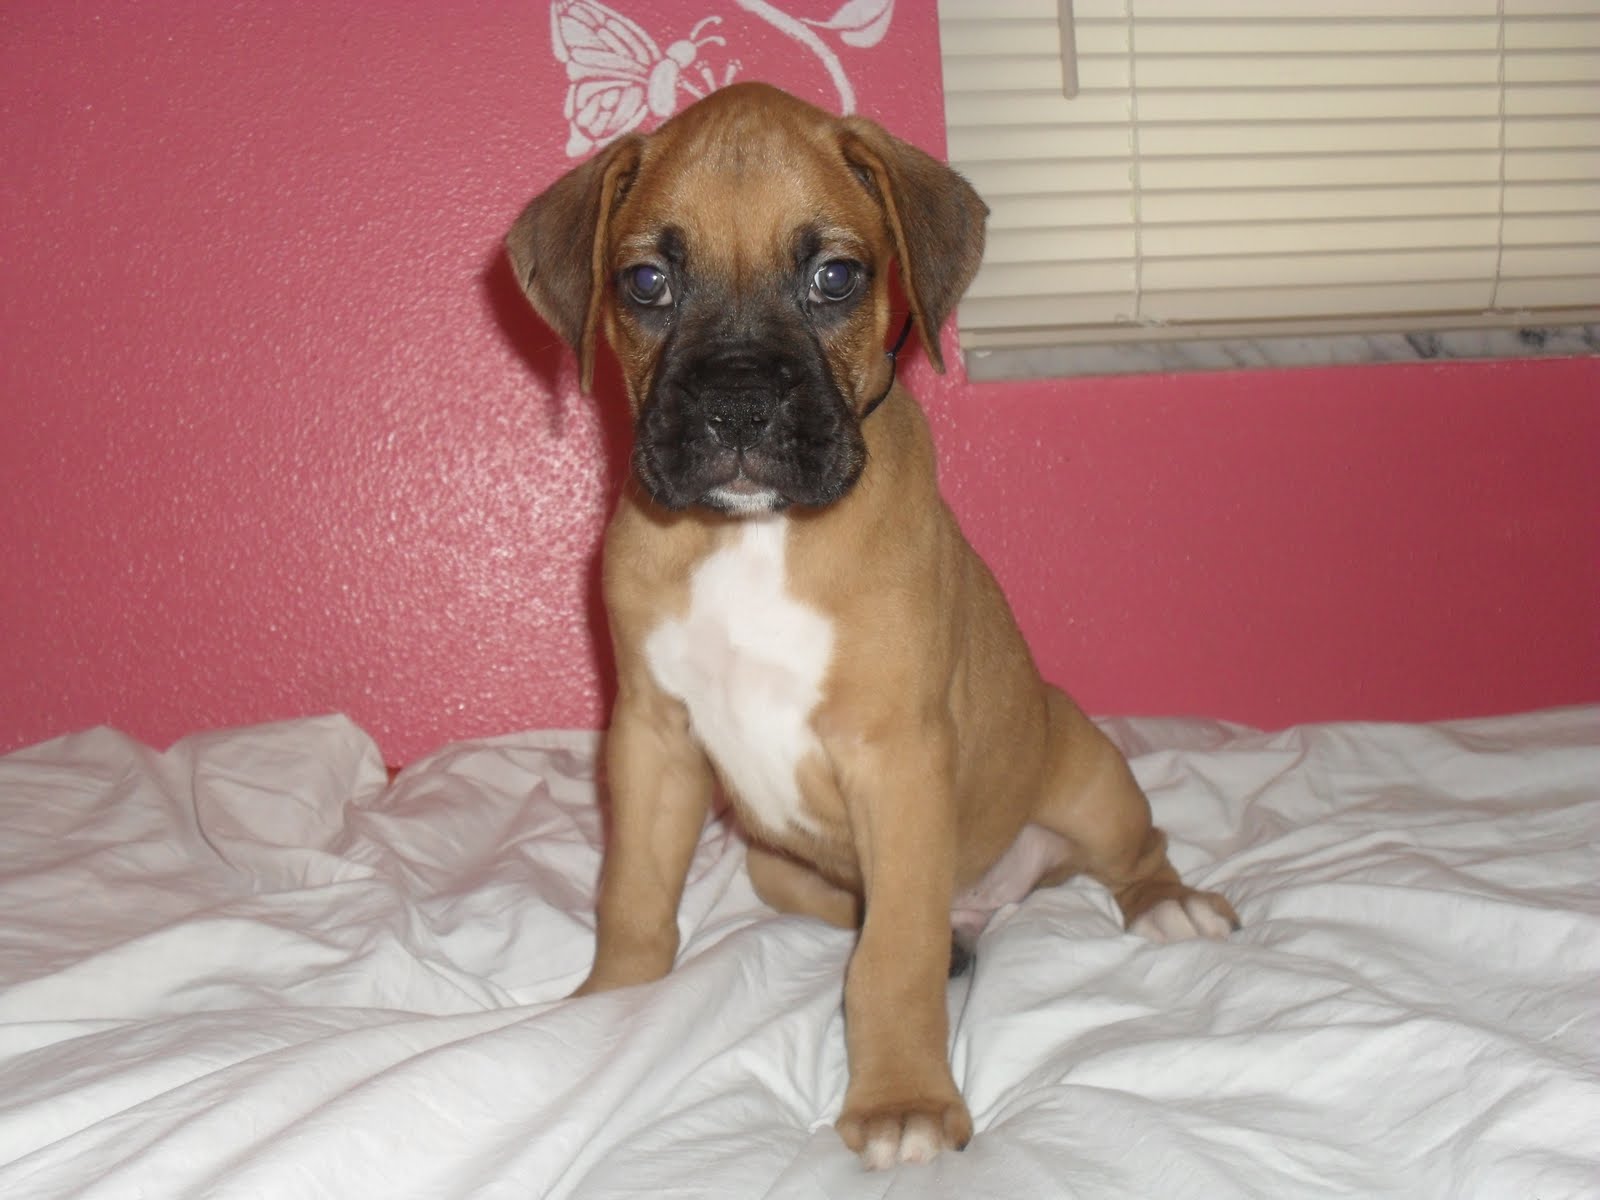 69+ Pure Boxer Puppies For Sale Picture - Bleumoonproductions